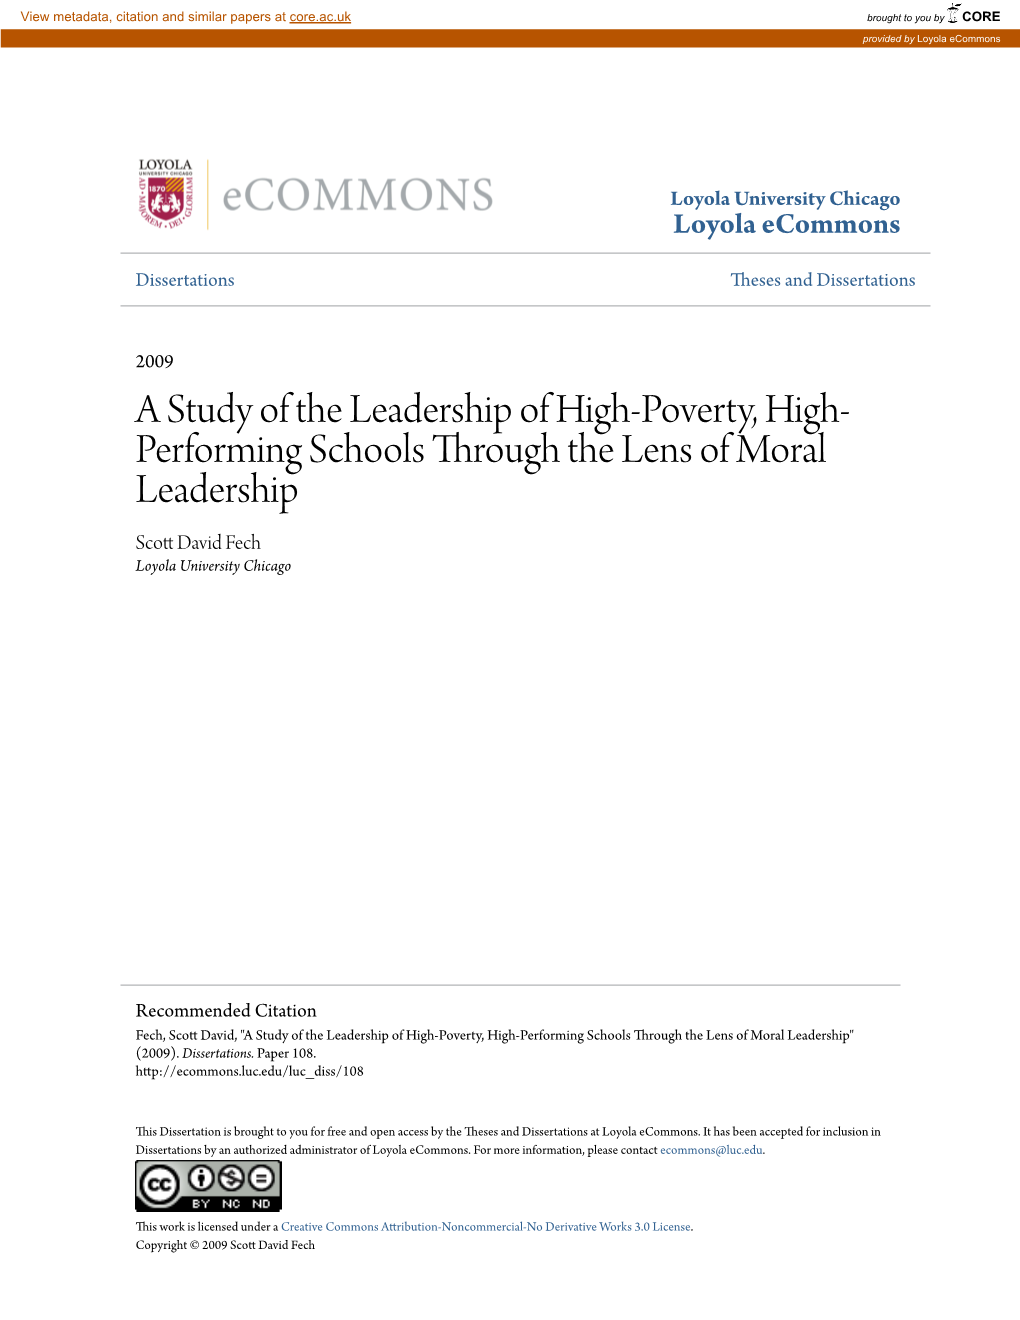 A Study of the Leadership of High-Poverty, High-Performing Schools Through the Lens of Moral Leadership" (2009)